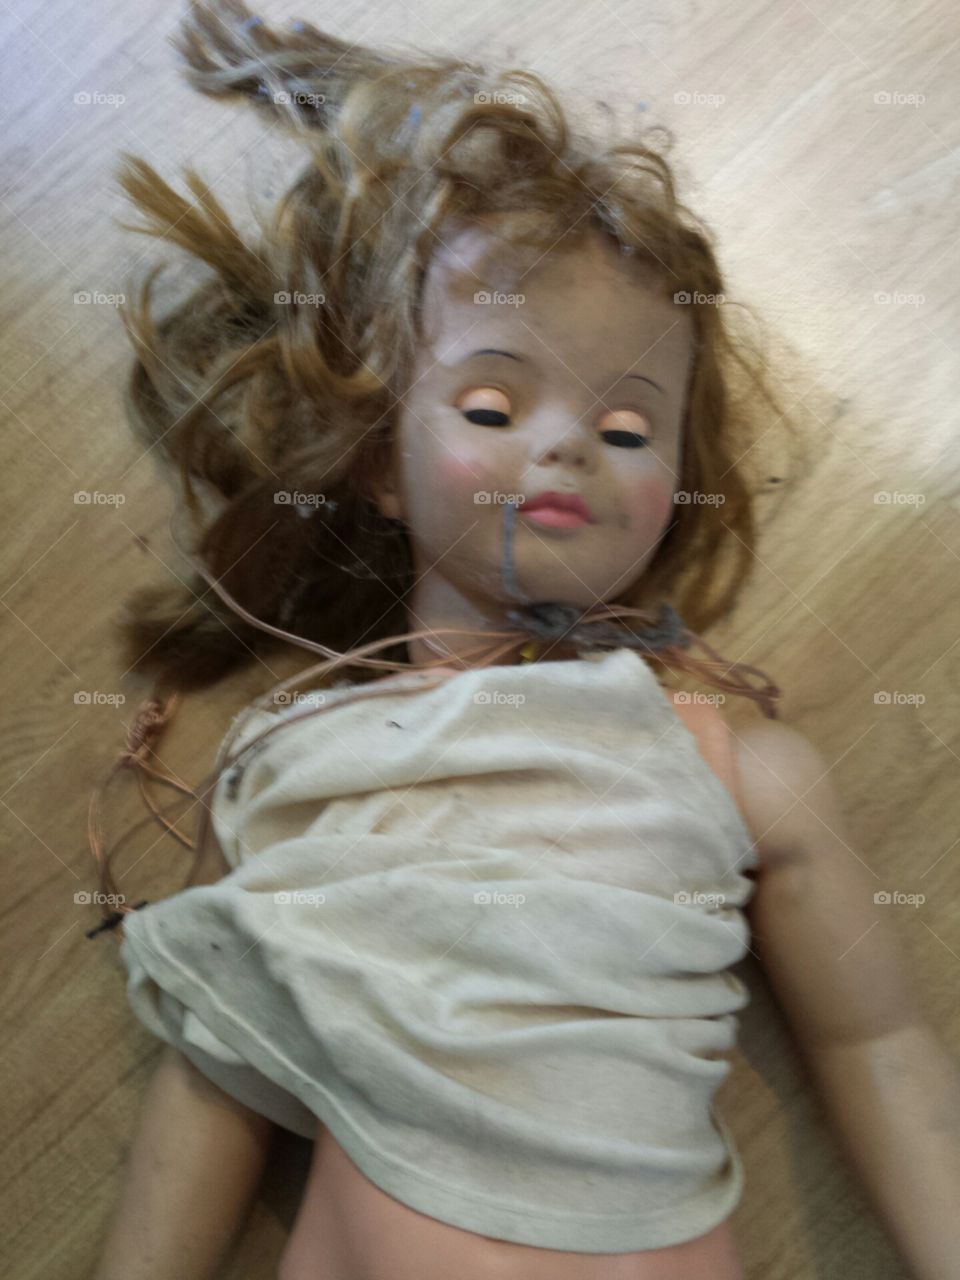 old neglected doll